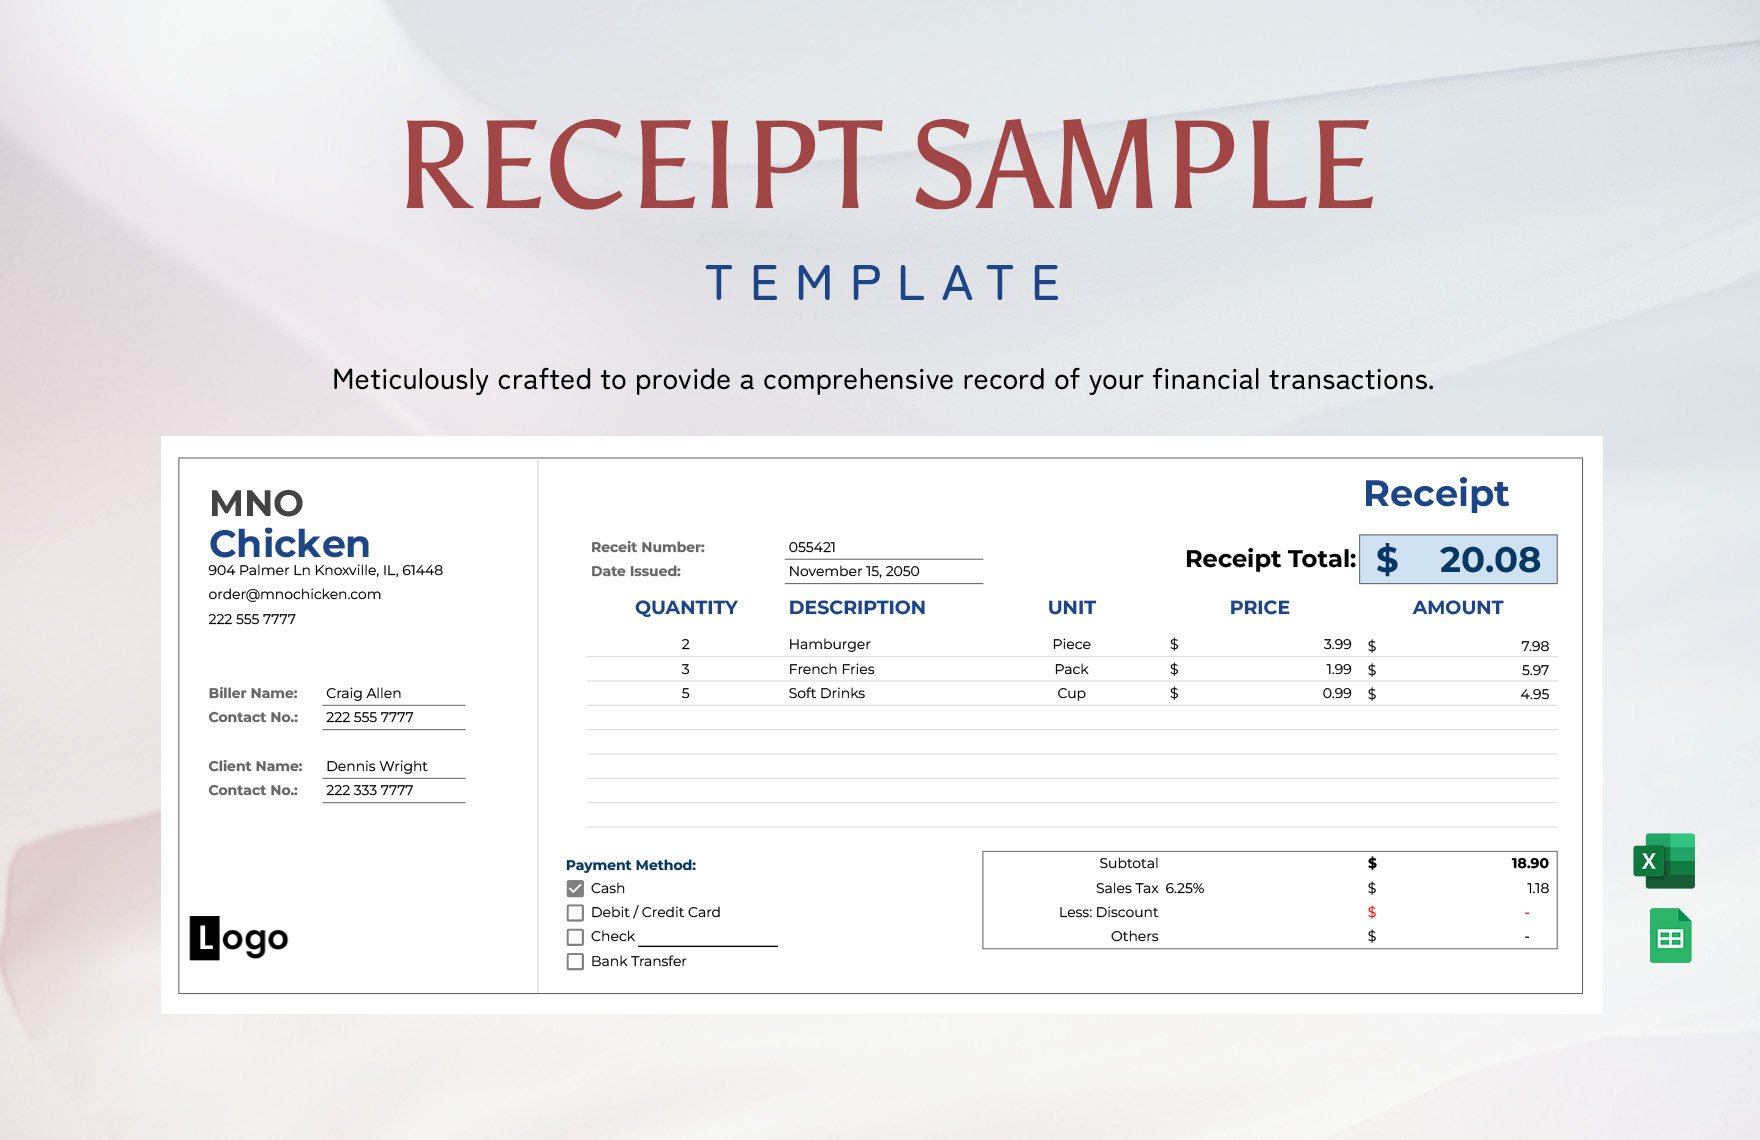 Free Receipt Sample in Excel, Google Sheets